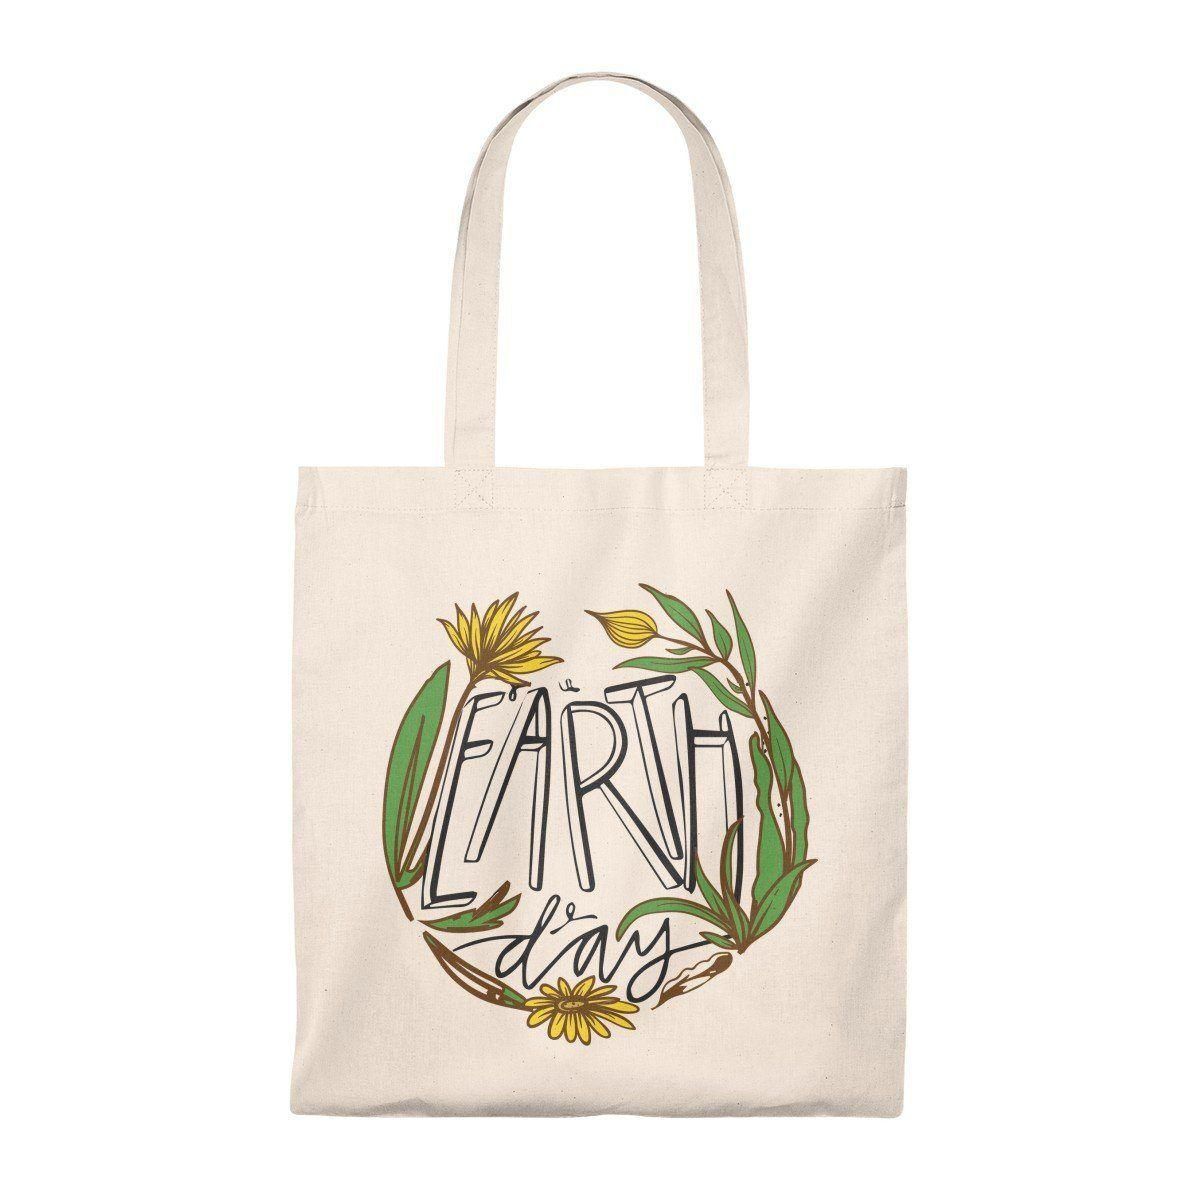 I'M With Her Earth Day Tote Bag